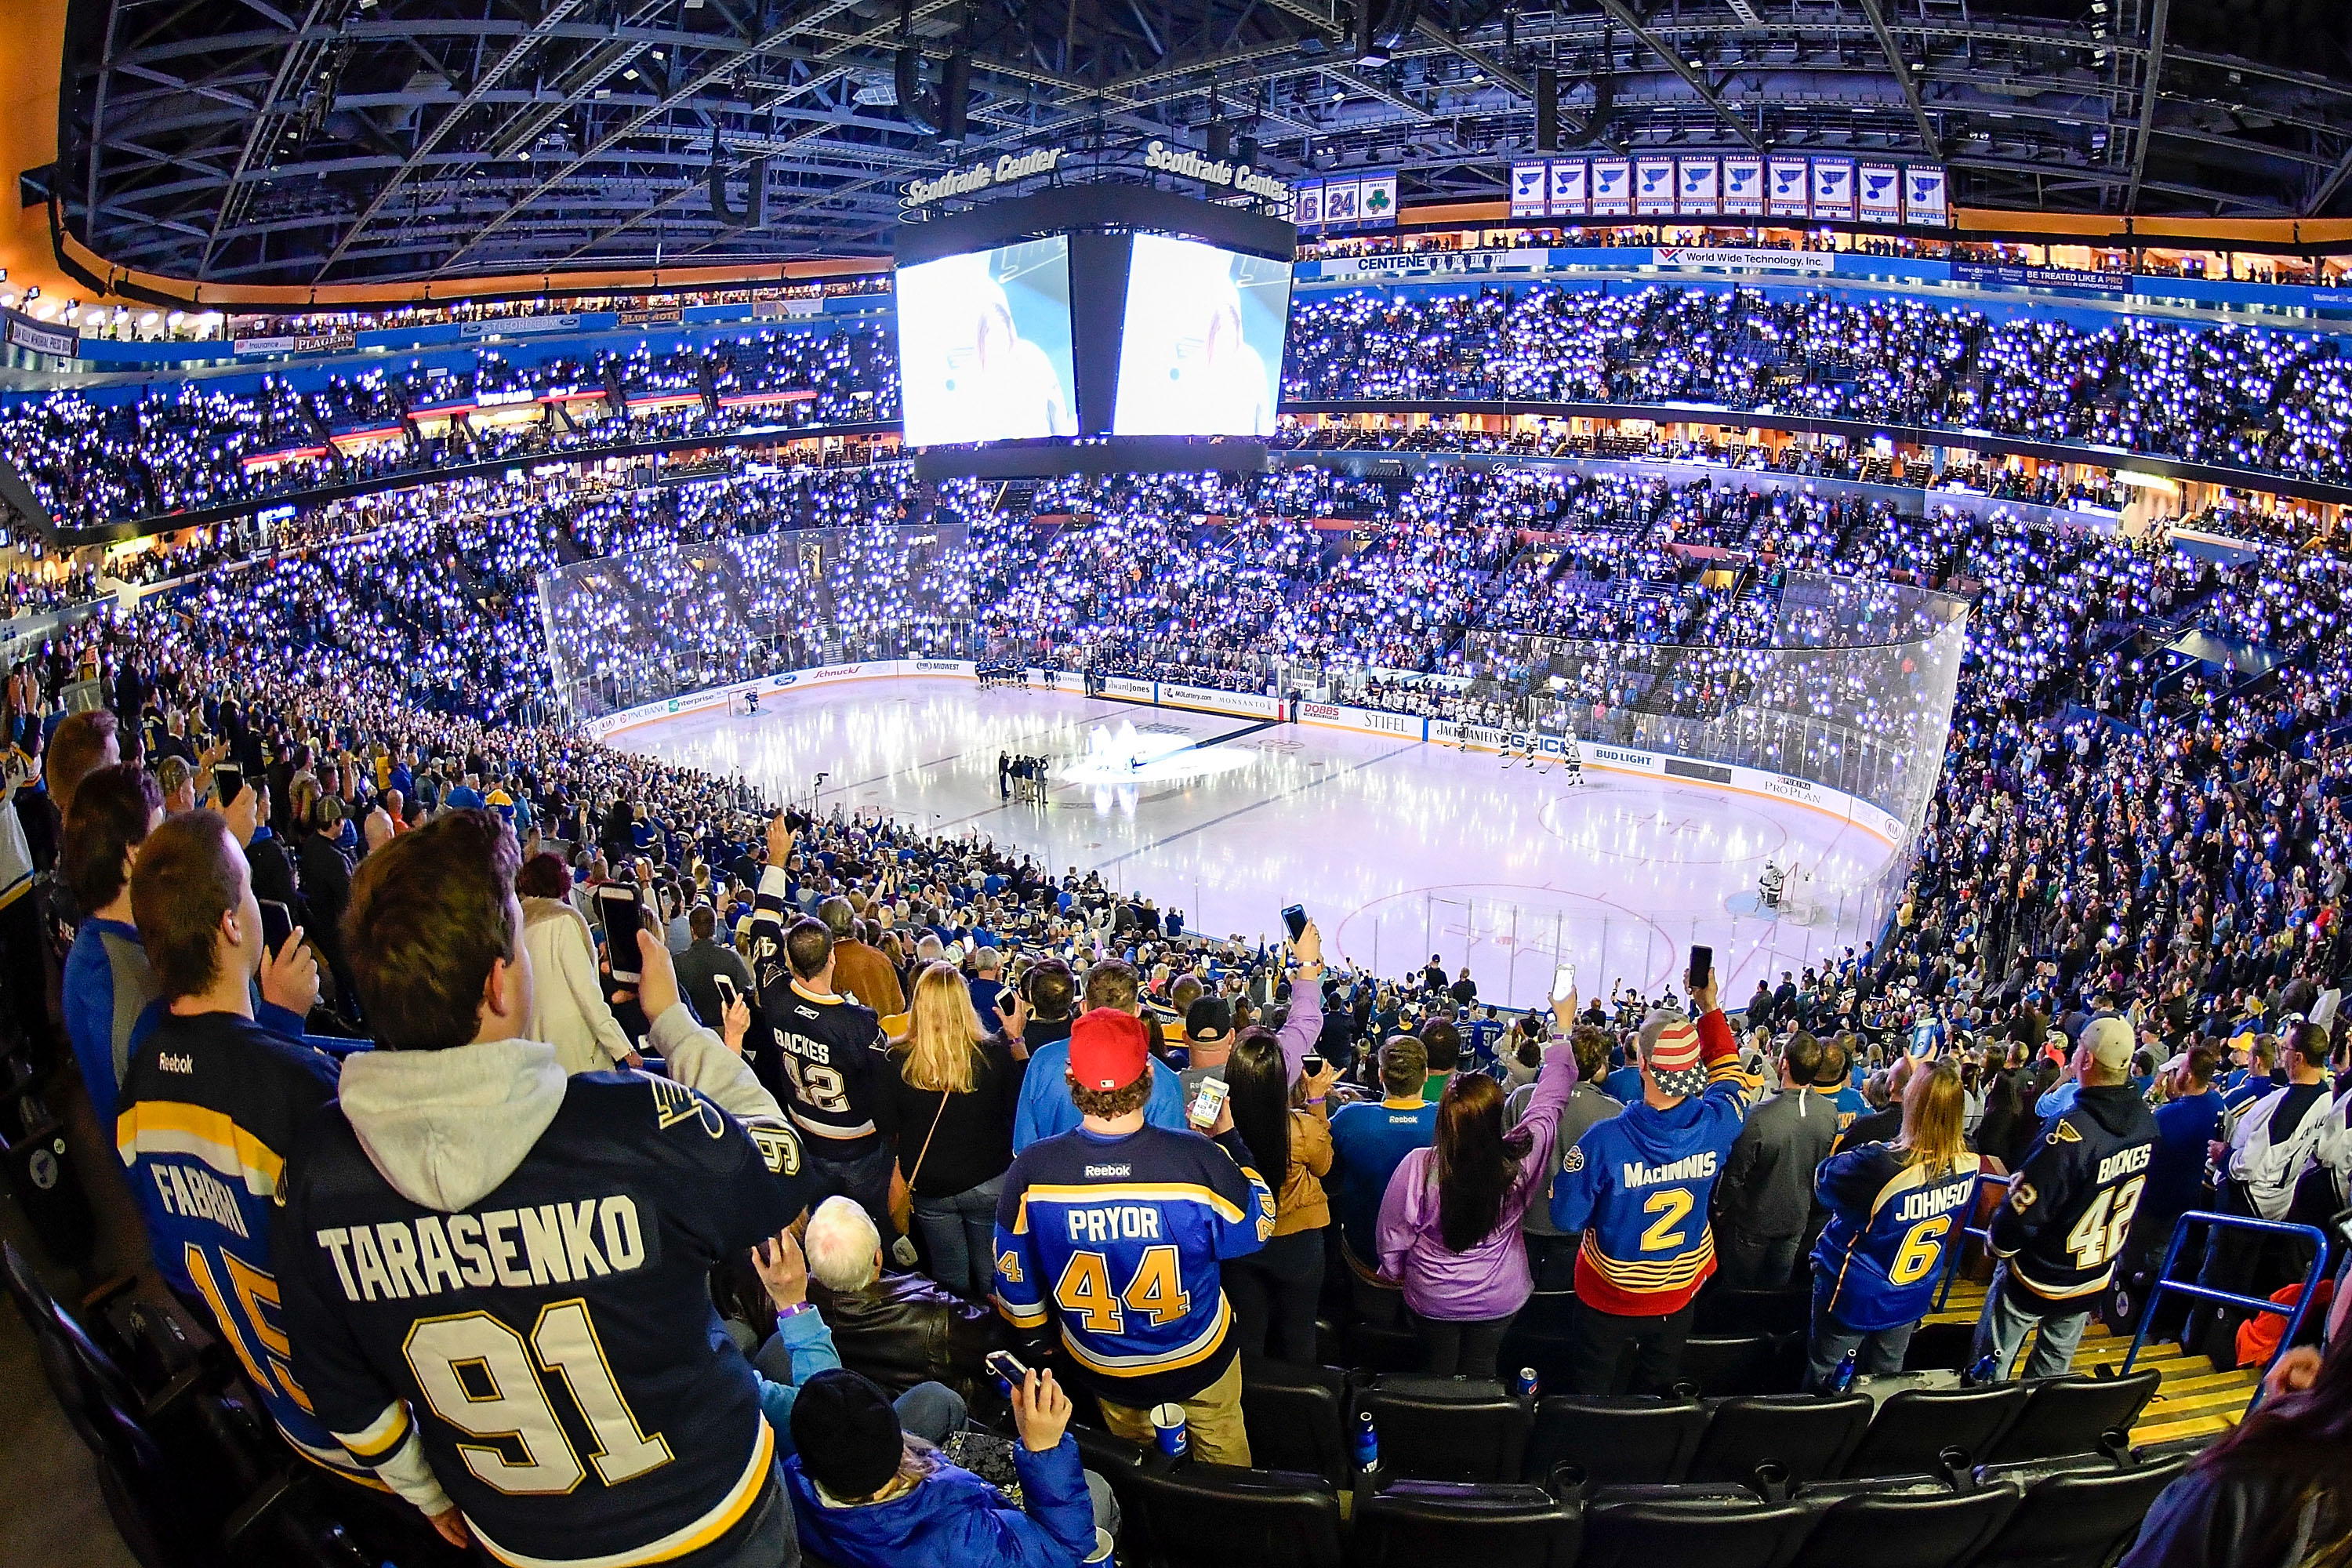 St. Louis Blues ticket prices rise as team expects large crowds